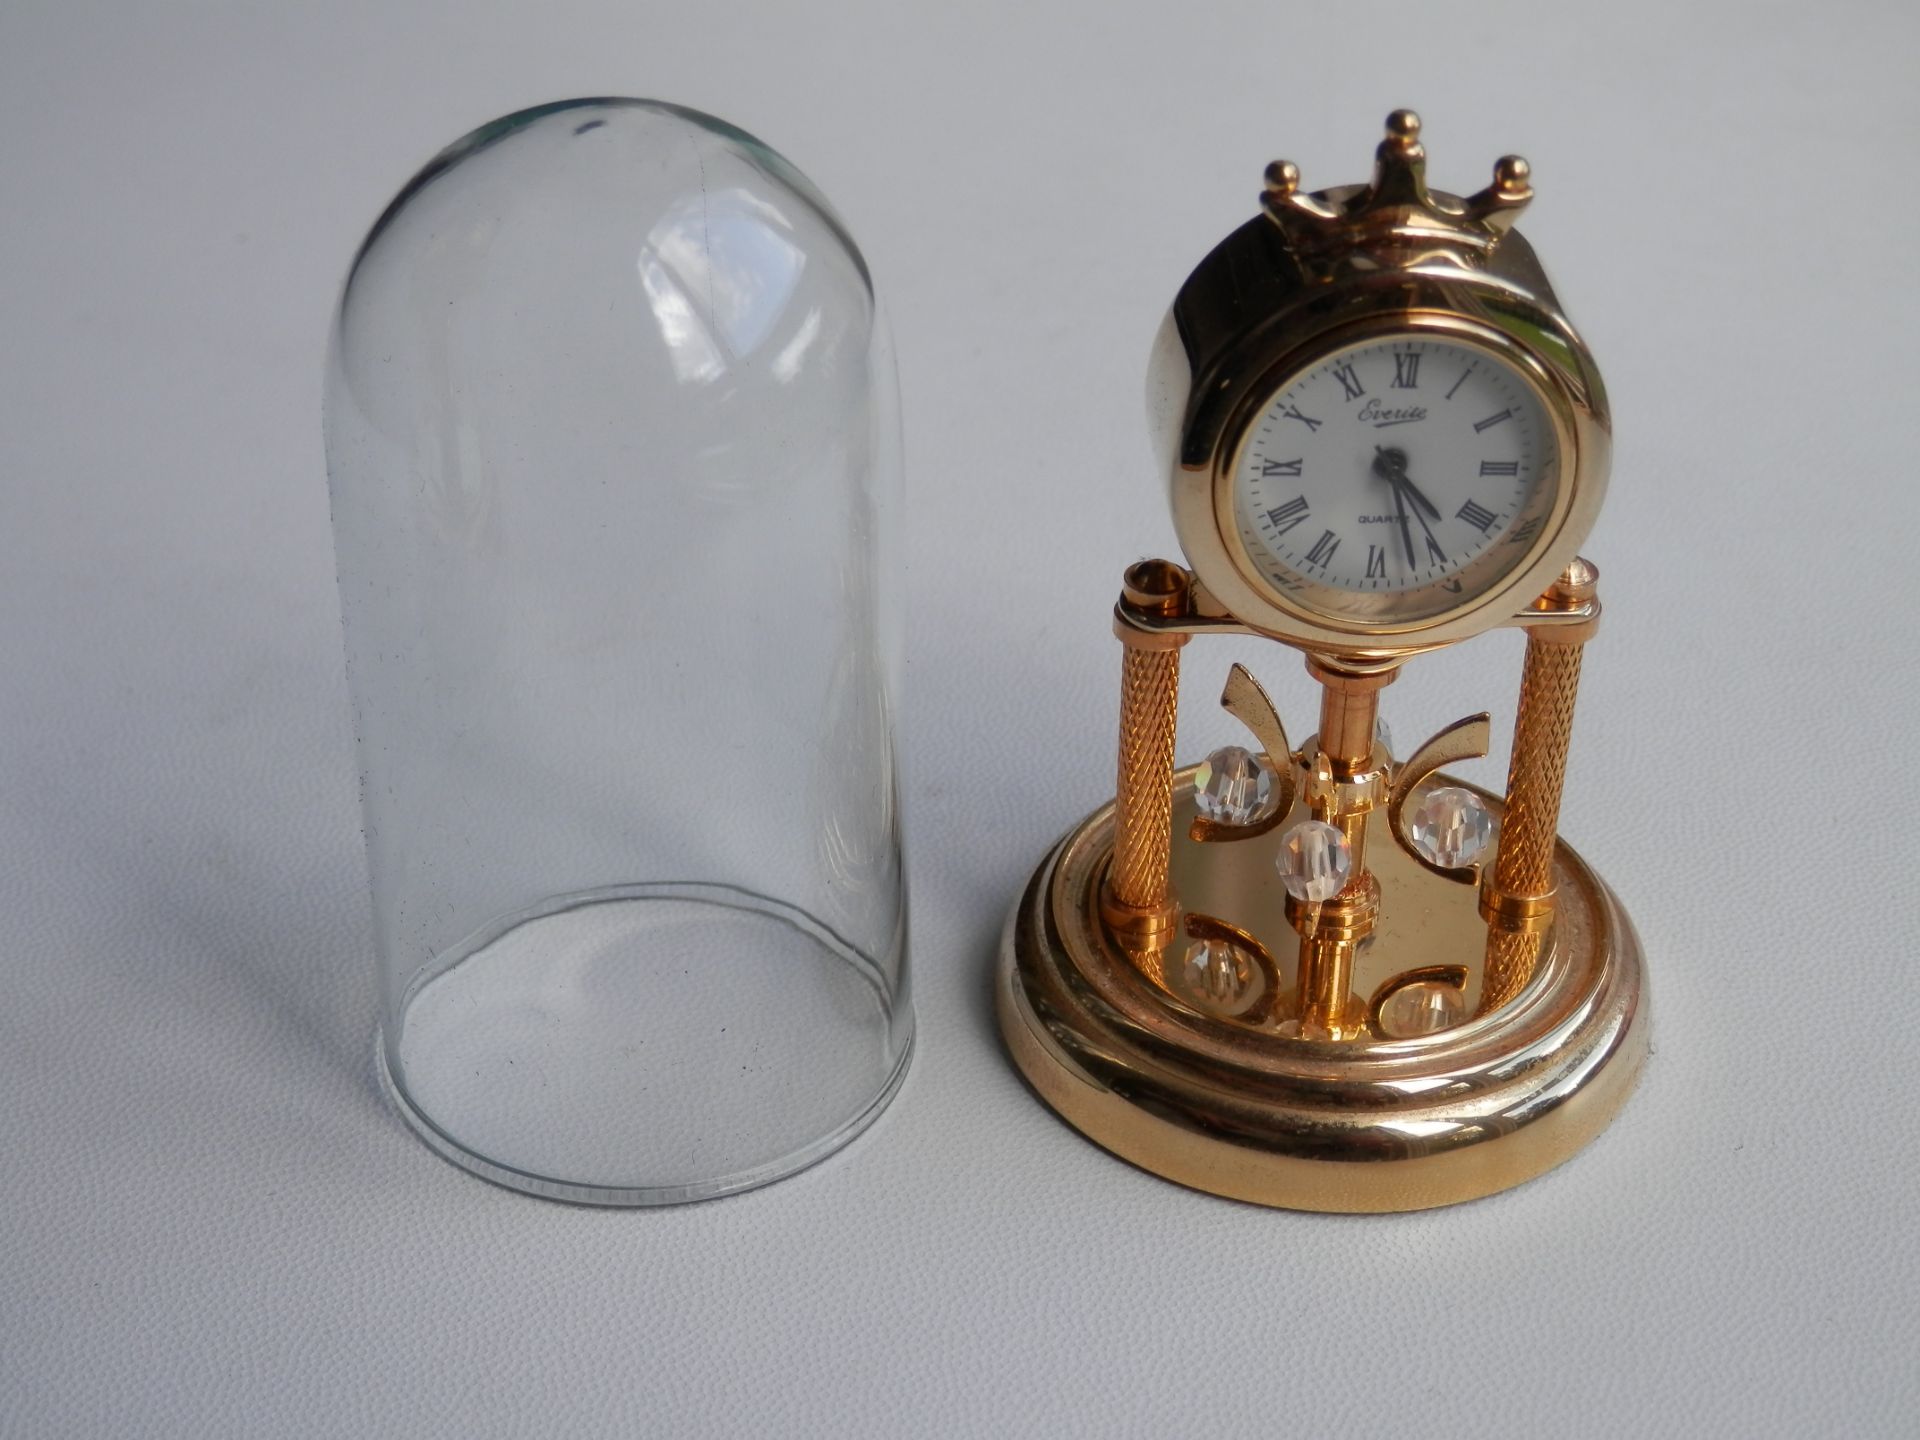 LOVELY 3" EVERITE WORKING BRASS ANNIVERSARY QUARTZ MINIATURE CLOCK WITH GLASS DOME & CASE. - Image 2 of 4